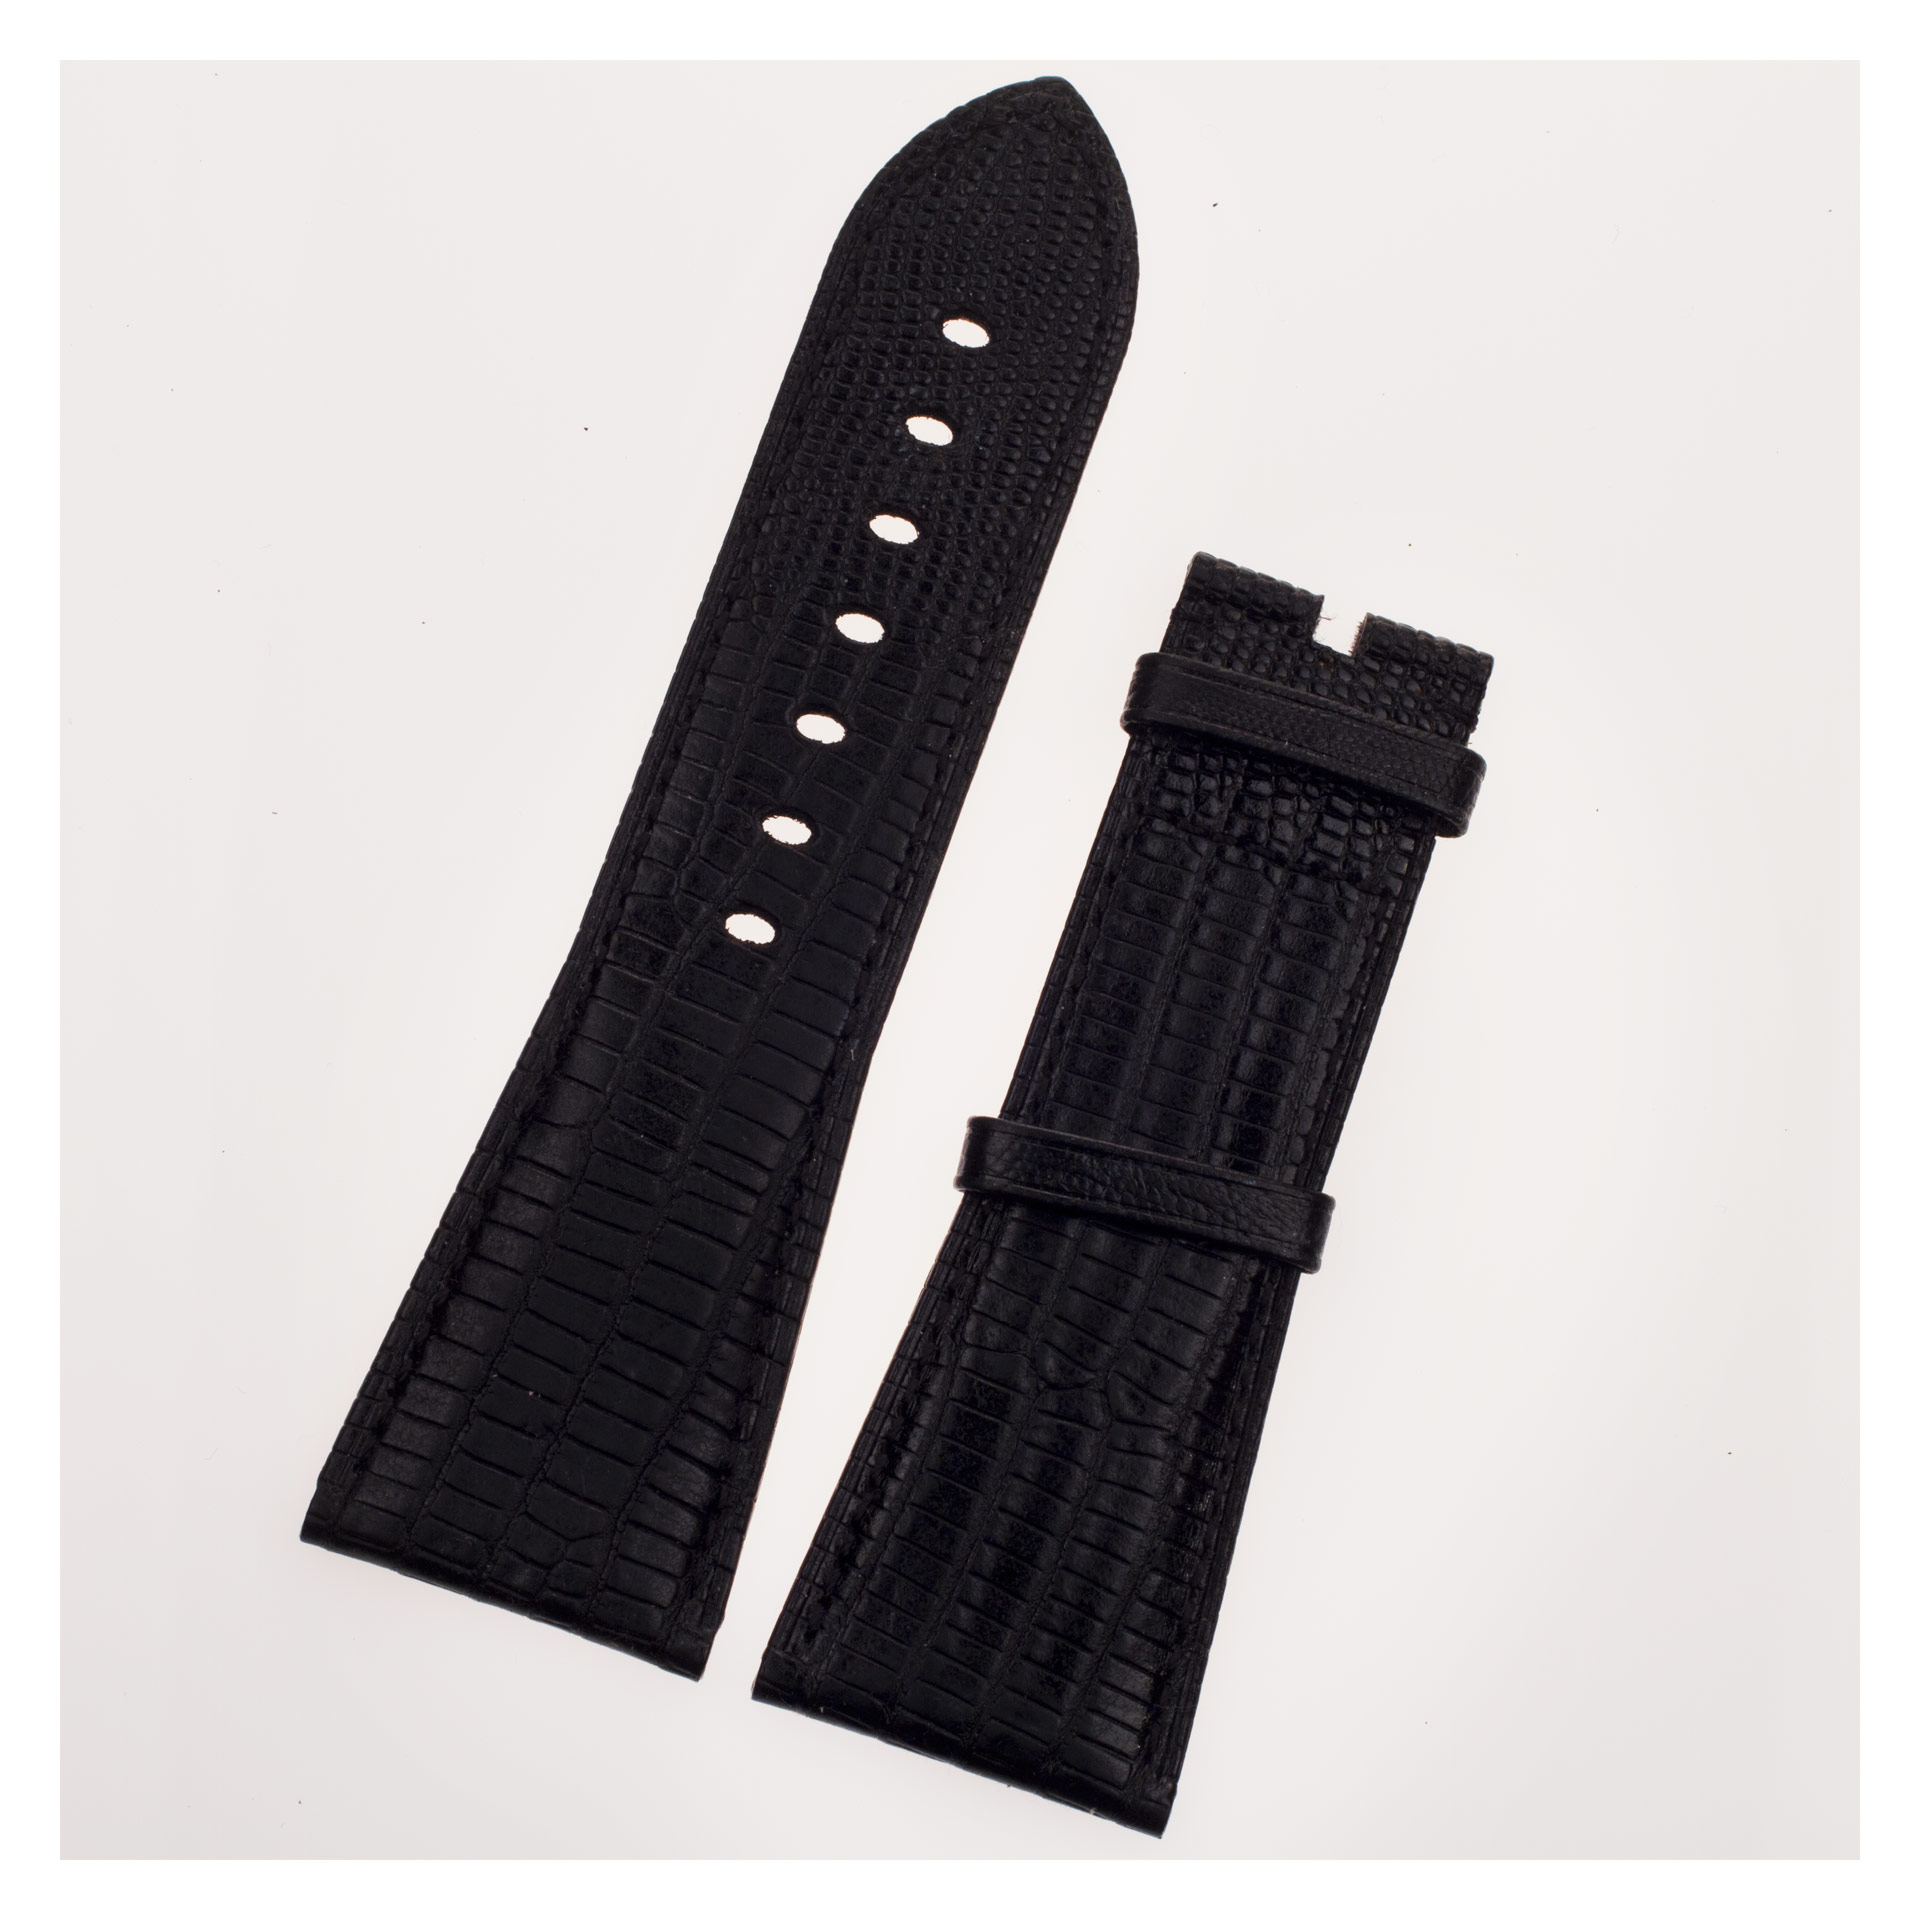 Cartier black lizard strap (29x22). With a length of 4.5" long piece and 3.25" short piece. image 1